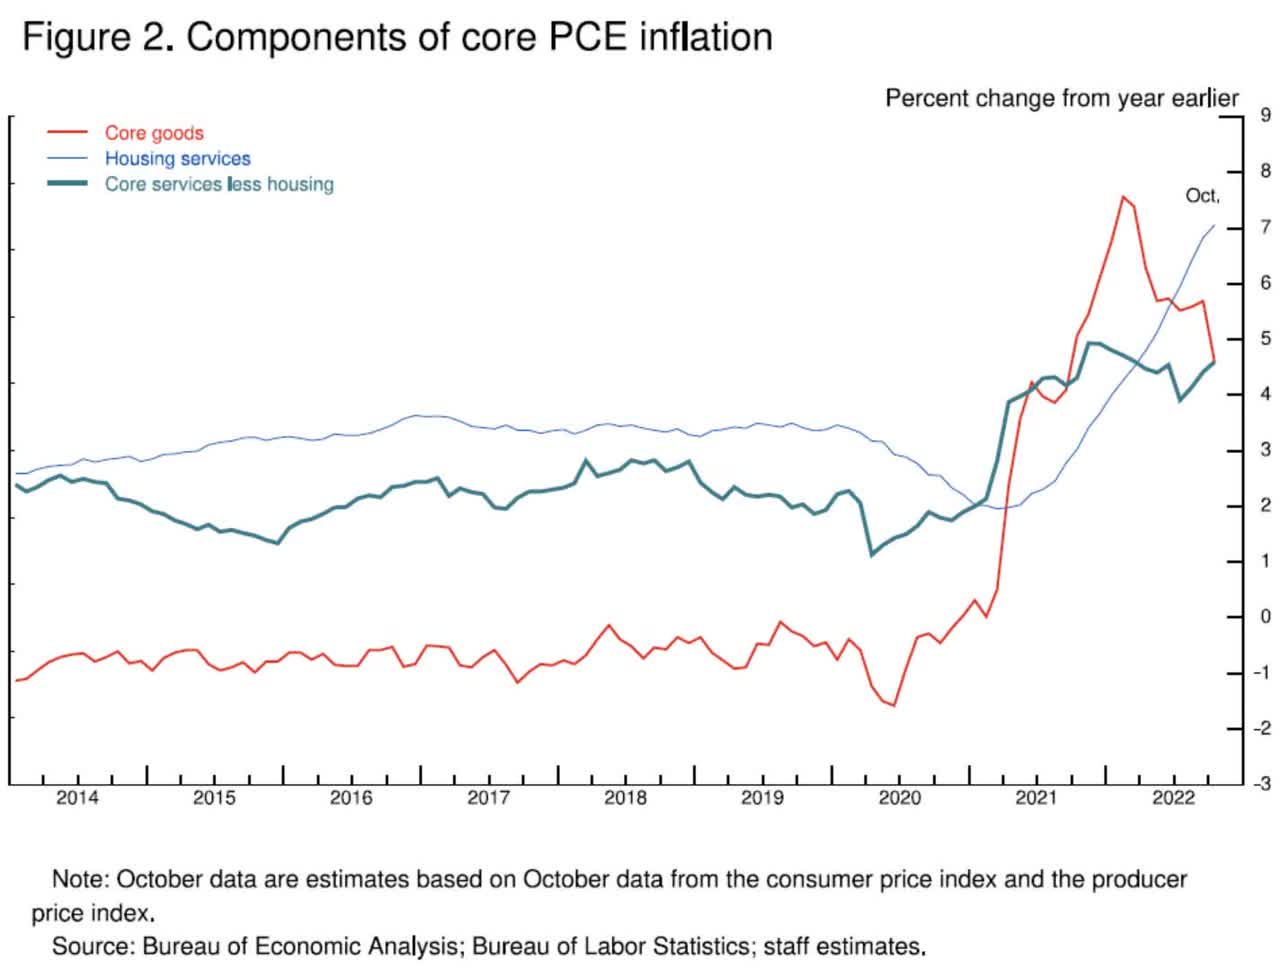 Core goods, housing services, core services less housing - components of Core PCE inflation, percentage change from year earlier